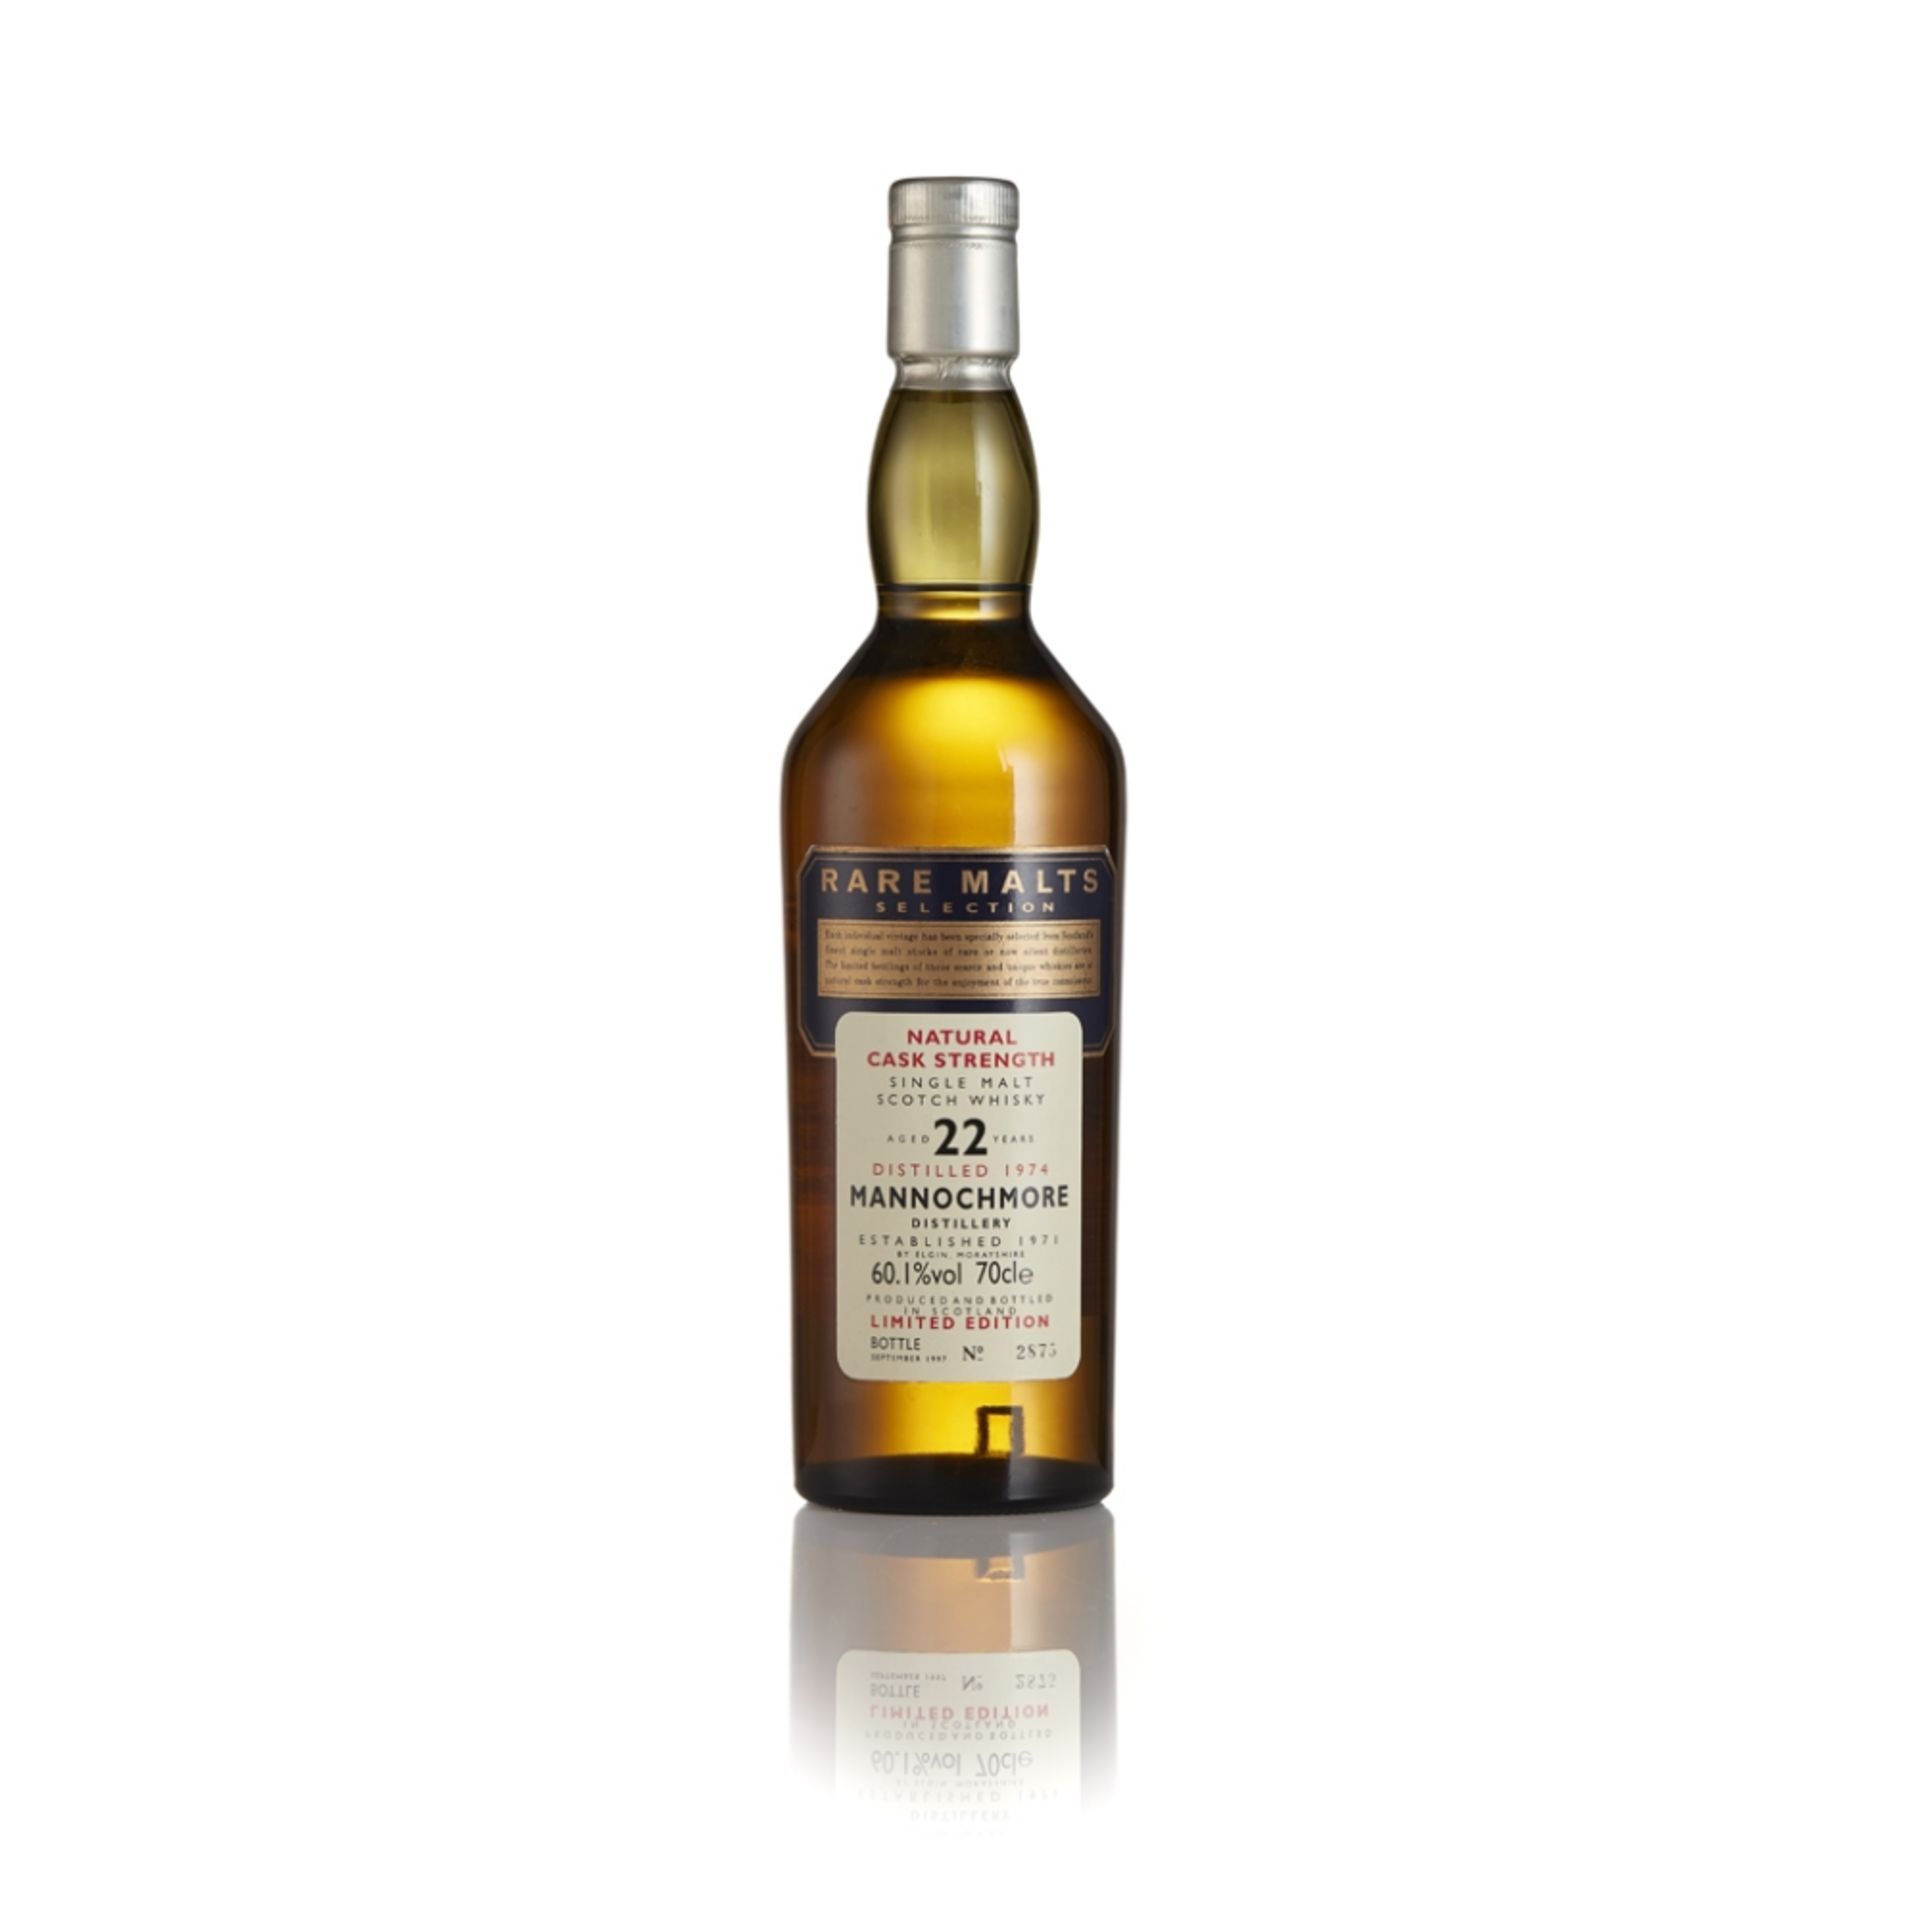 MANNOCHMORE 1974 22 YEAR OLD - RARE MALTS bottle number 2852, with carton 70cl/ 60.1%